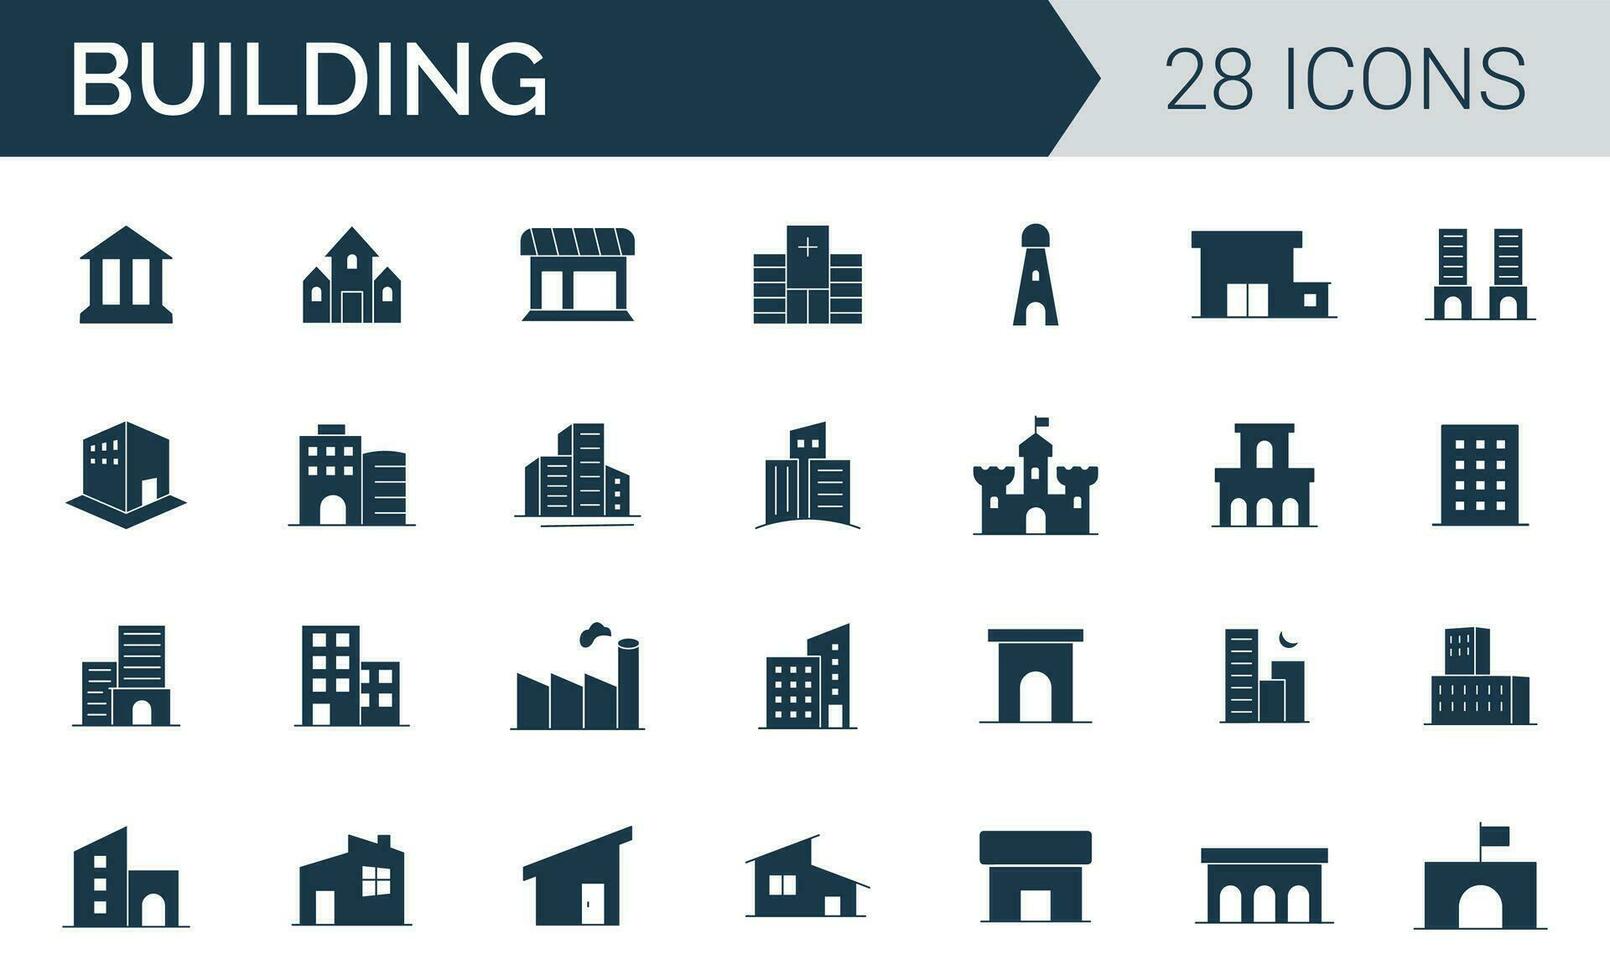 Building icon set. Cicons as Buildings, Architecture, Construction, Real Estate, Home, office, and Castle solid icon vector